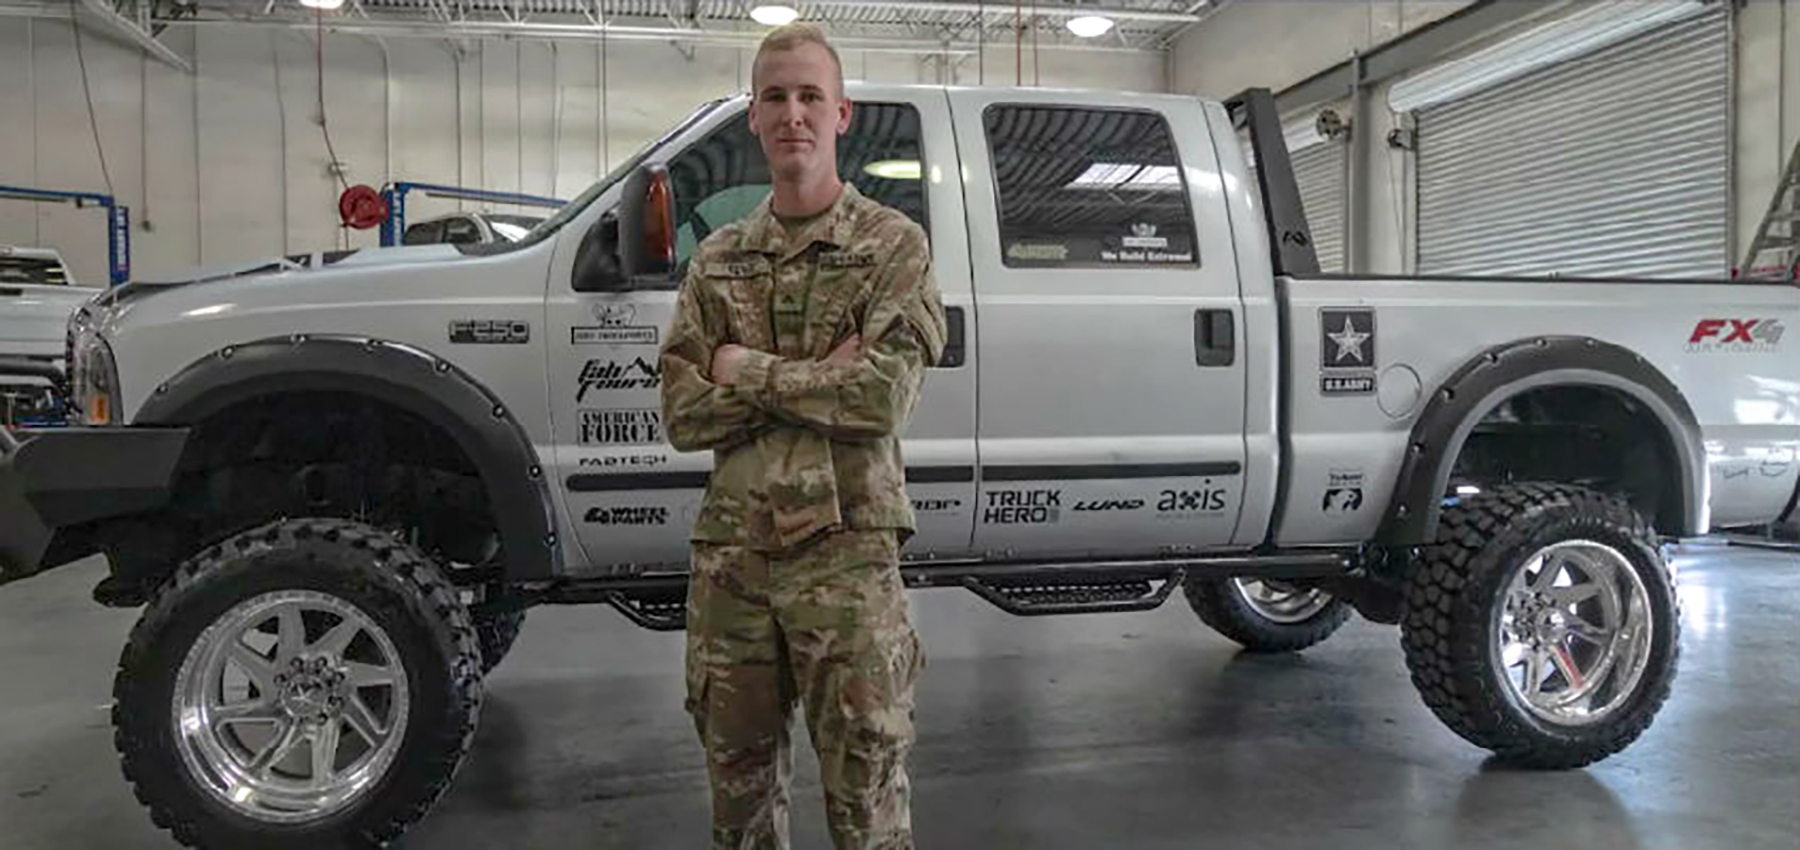 U.S. Army Cpl. James Wesley Trent standing in front of his new and fully customized Ford F-250 Super Duty